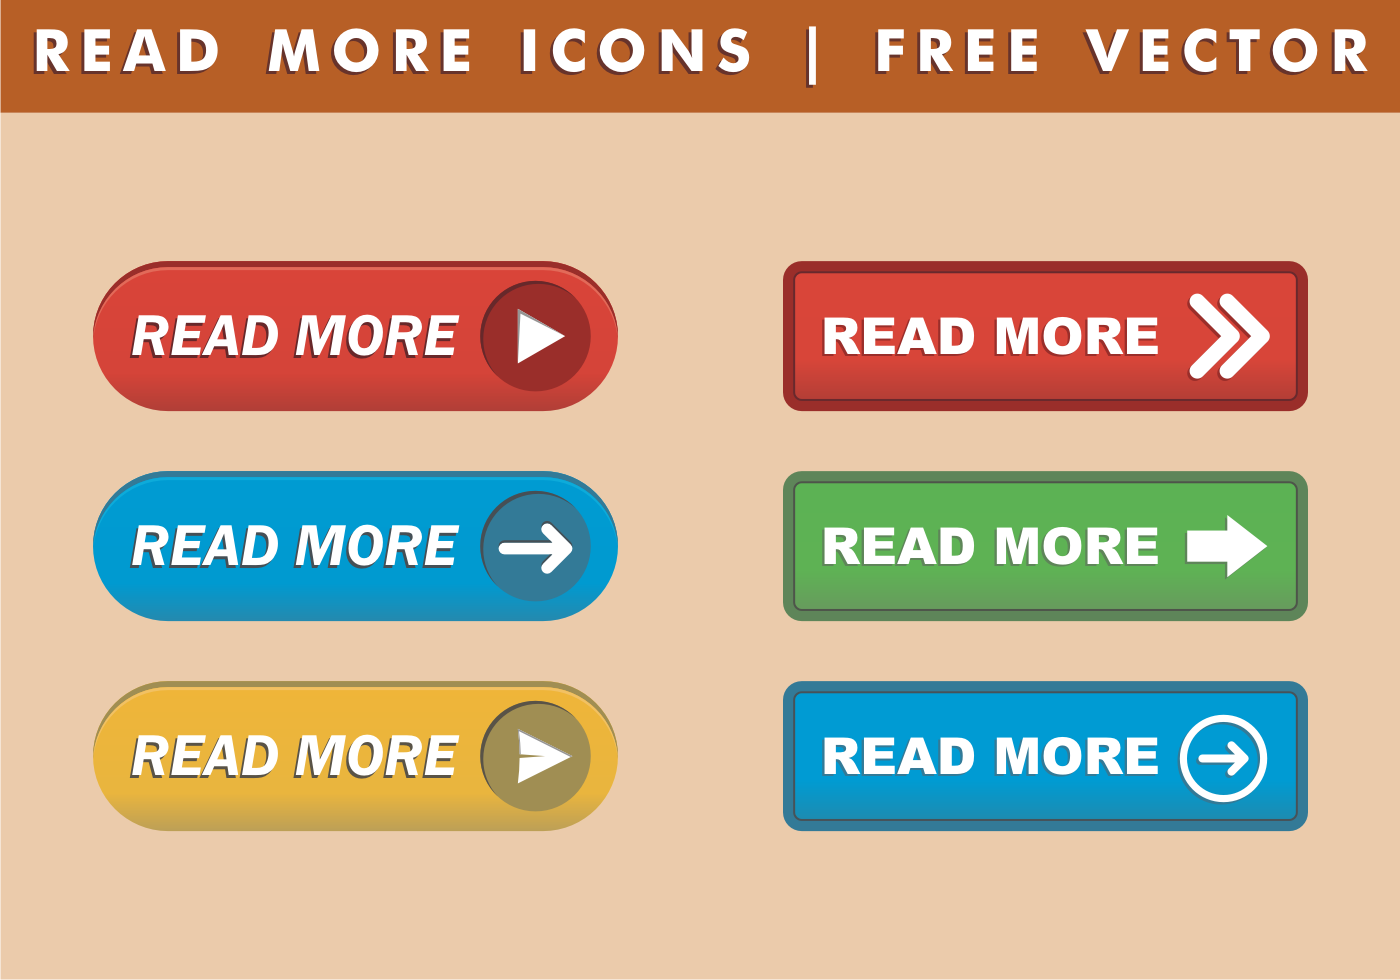 read-more-icons-free-vector.png